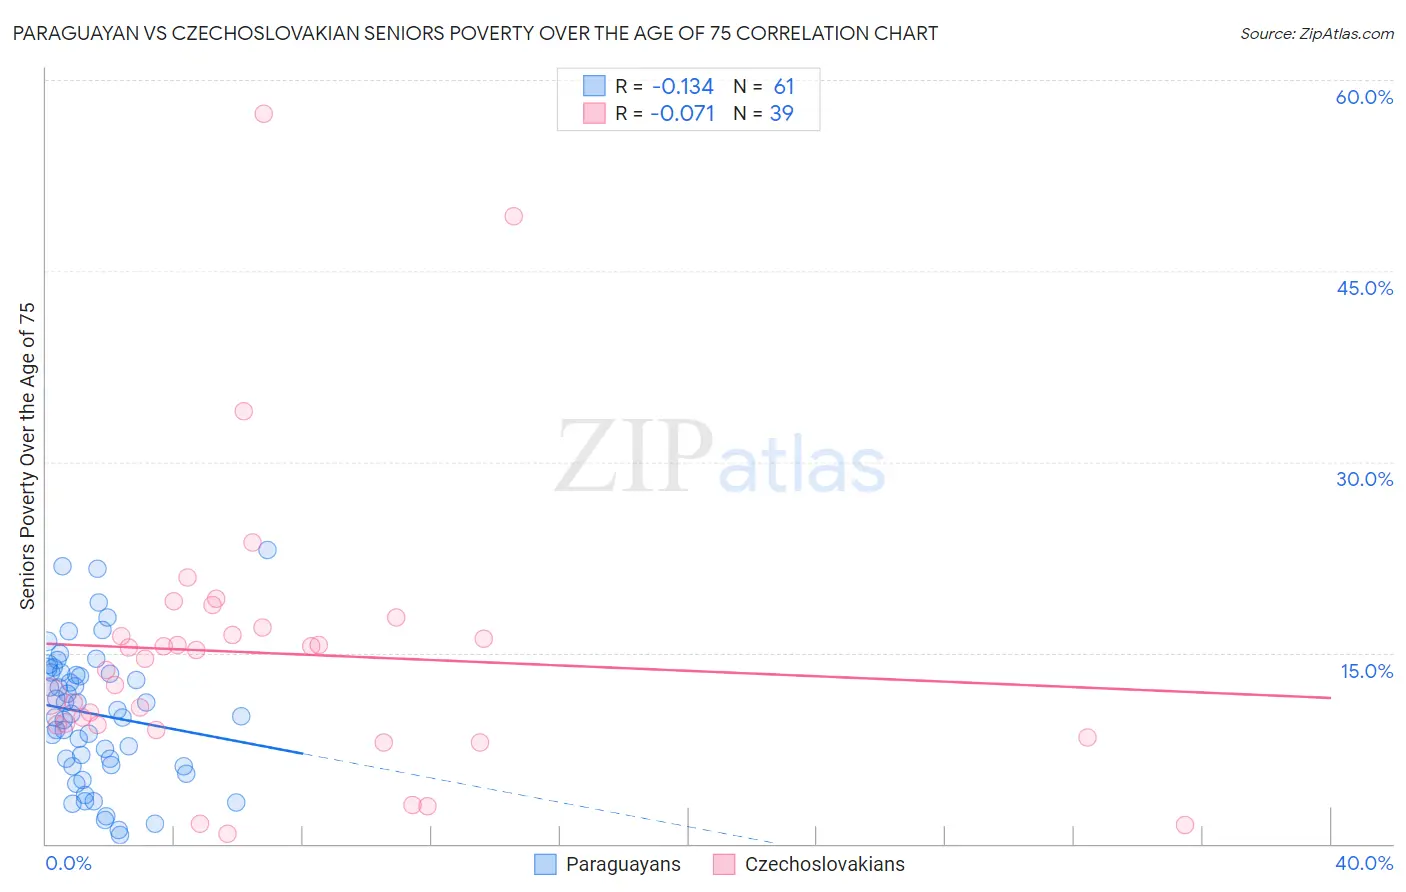 Paraguayan vs Czechoslovakian Seniors Poverty Over the Age of 75